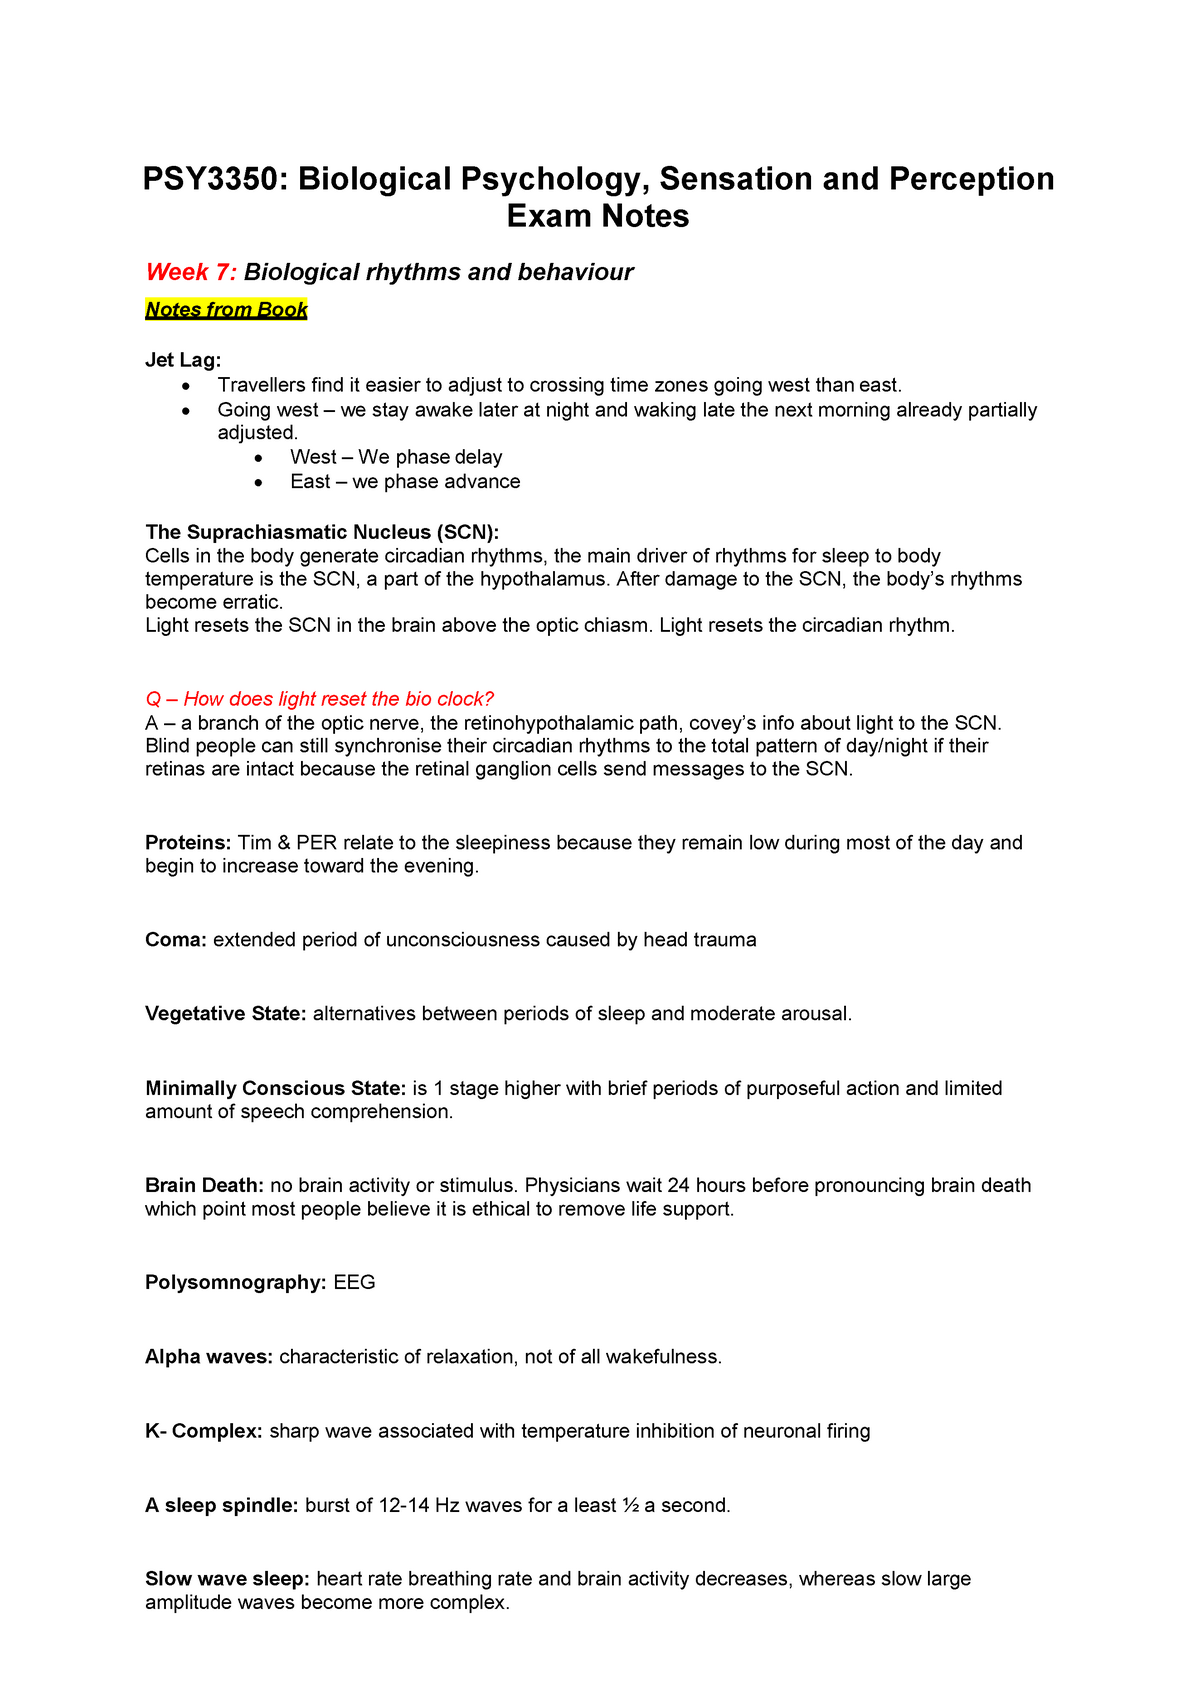 PSY3350 Biological rhythms and behaviour -Exam Notes - PSY3350 ...